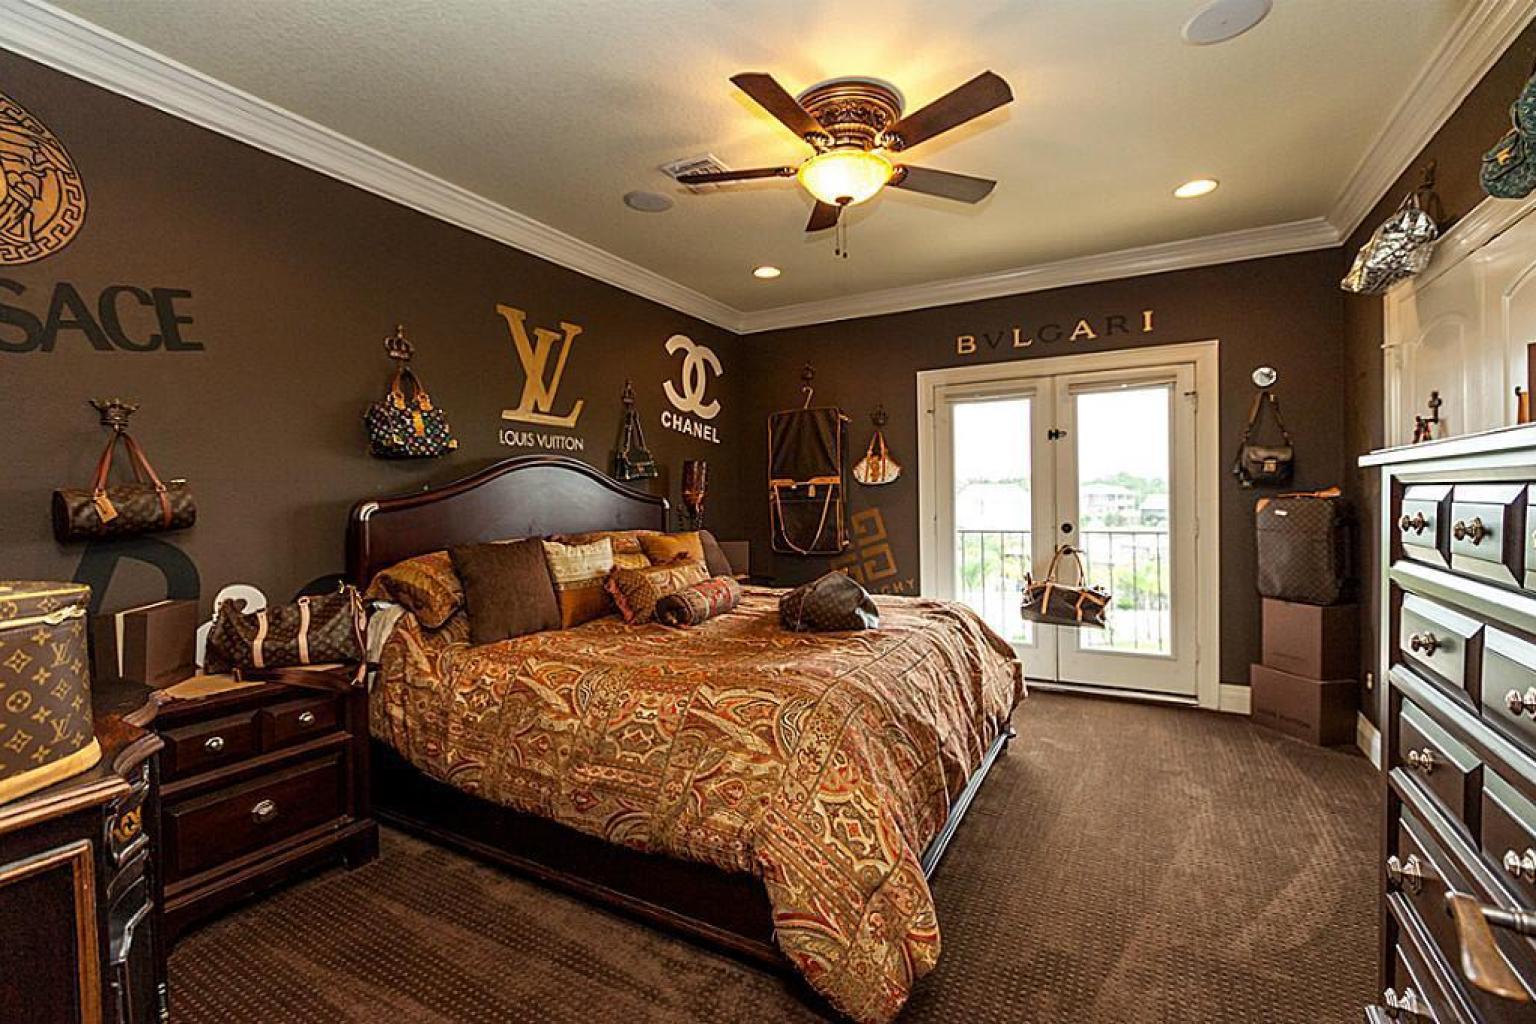 Louis Vuitton Bedroom In Texas Home For Sale Takes Fashion Obsession To A Whole New Level ...